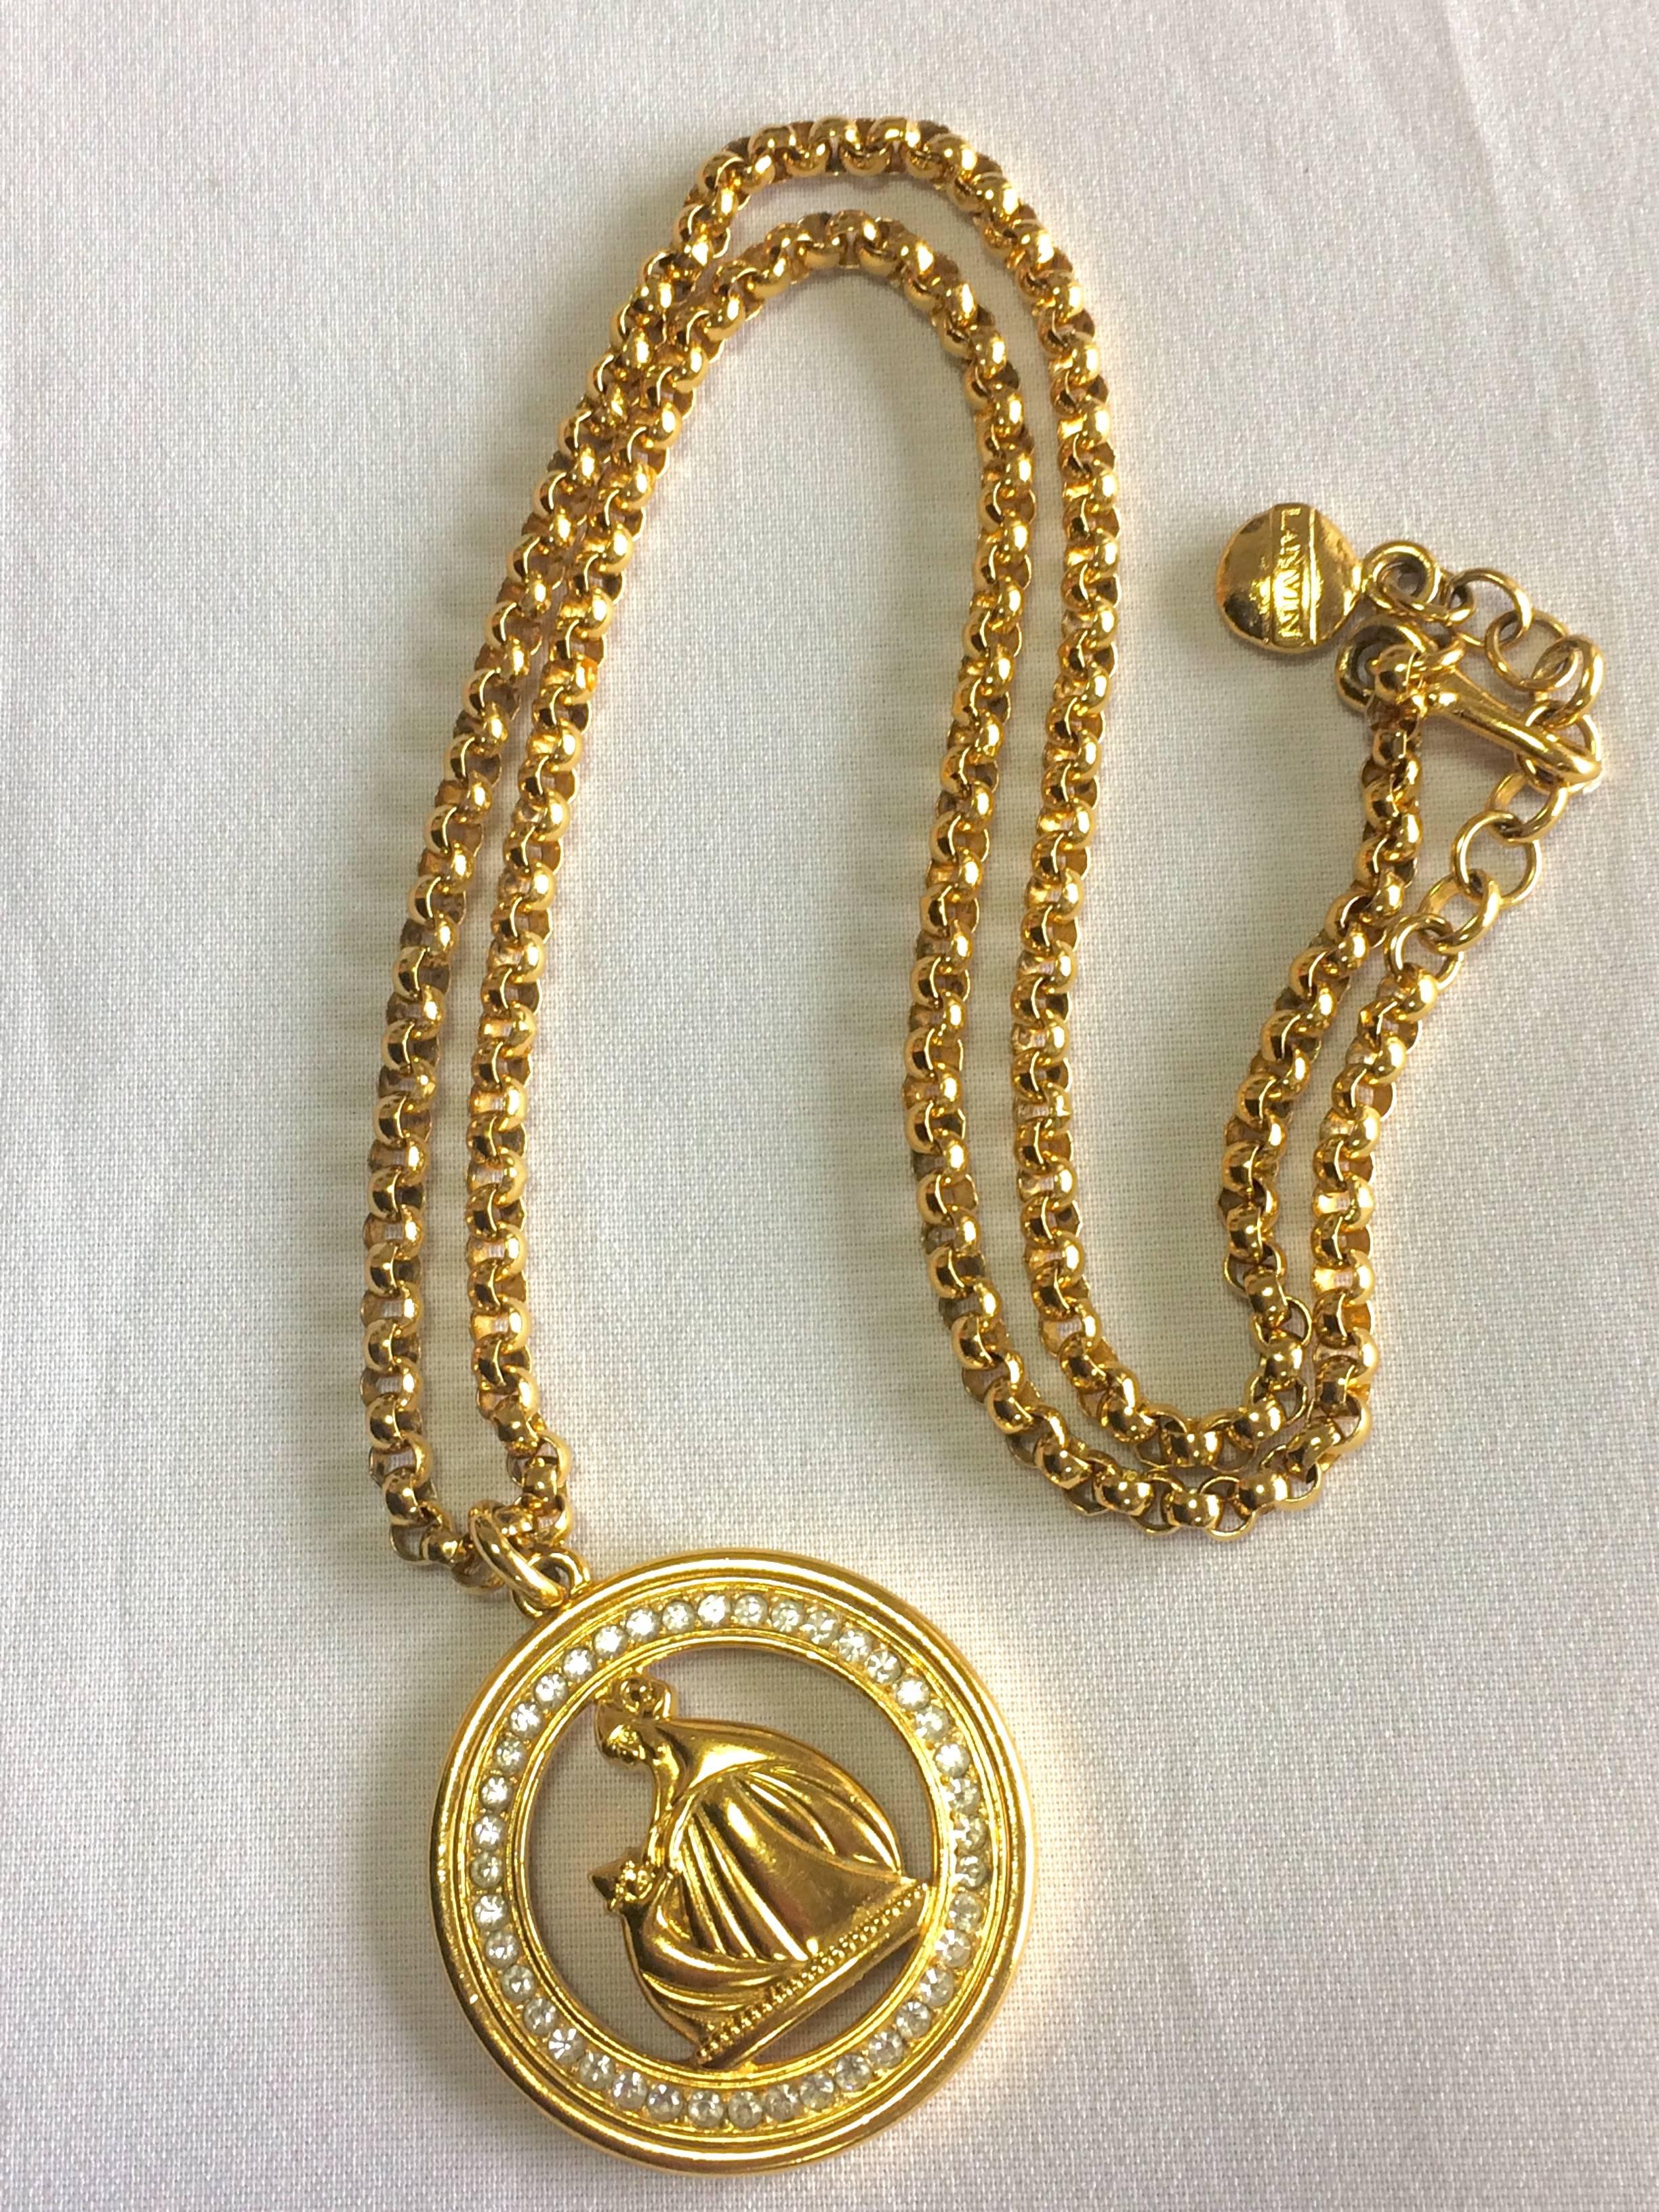 MINT. Vintage LANVIN golden chain necklace with large logo pendant top. Germany. 1